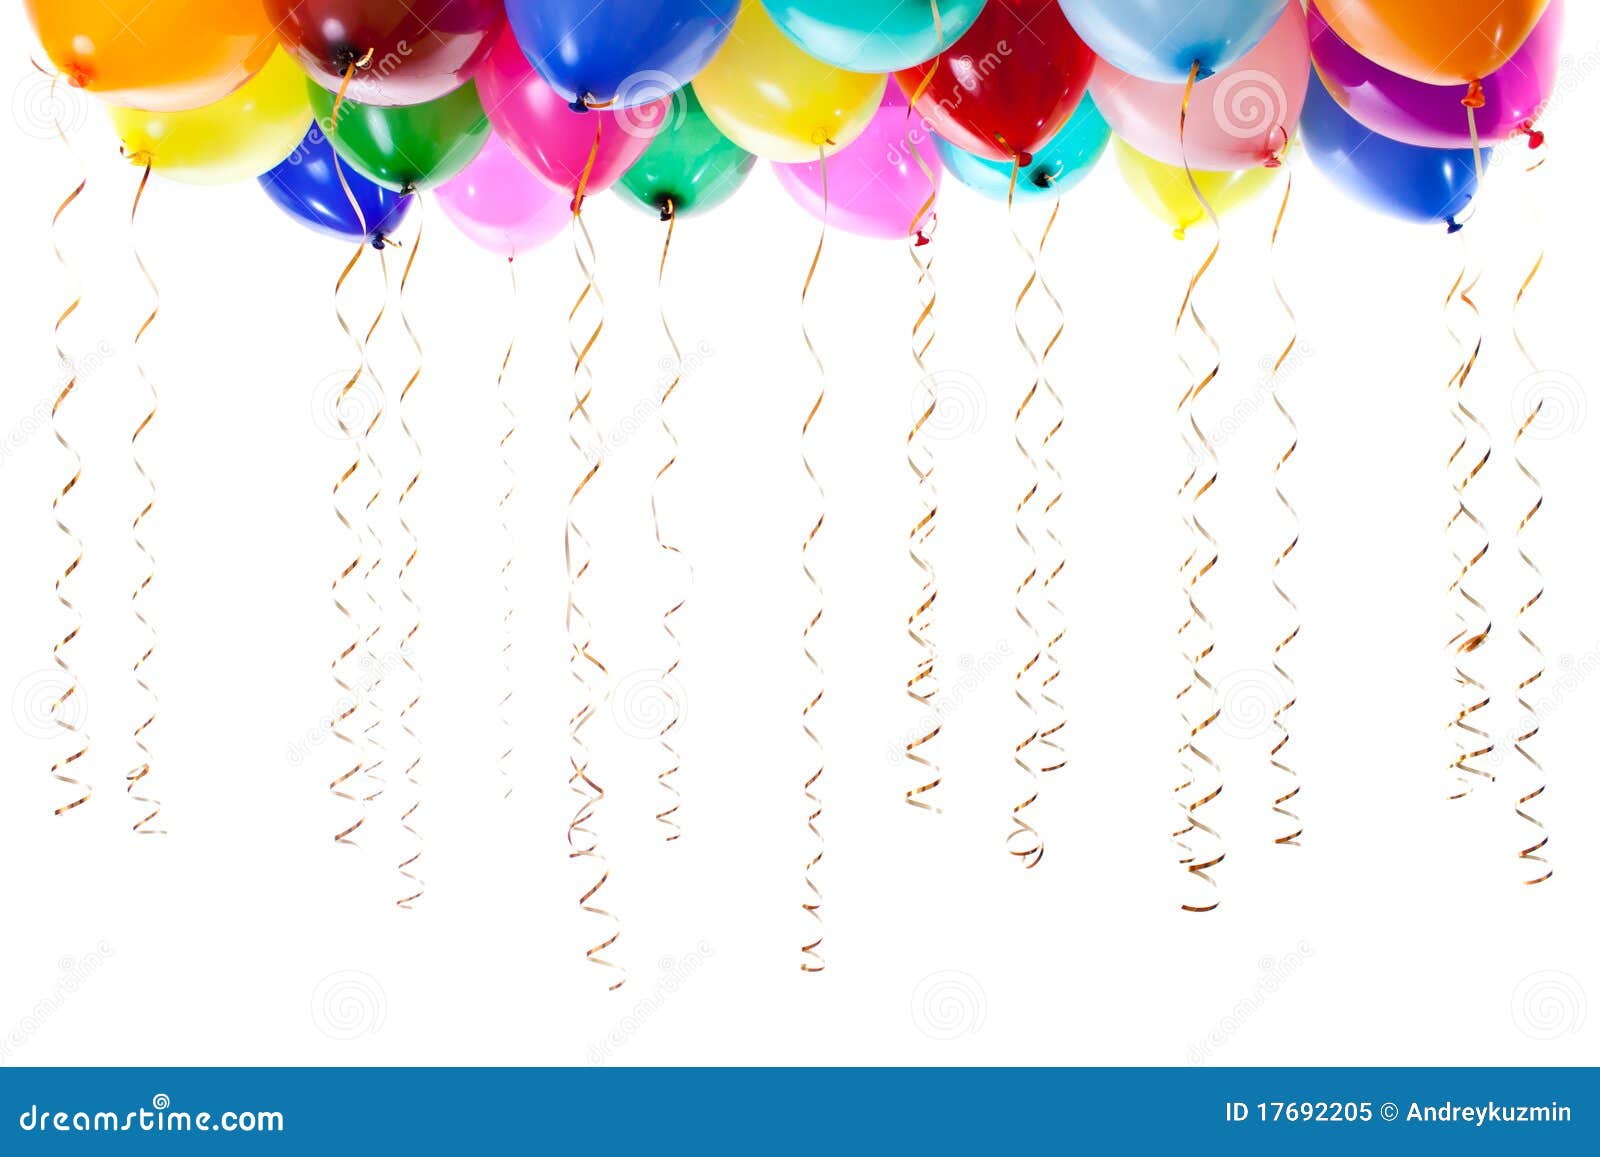 clip art free balloons and streamers - photo #13